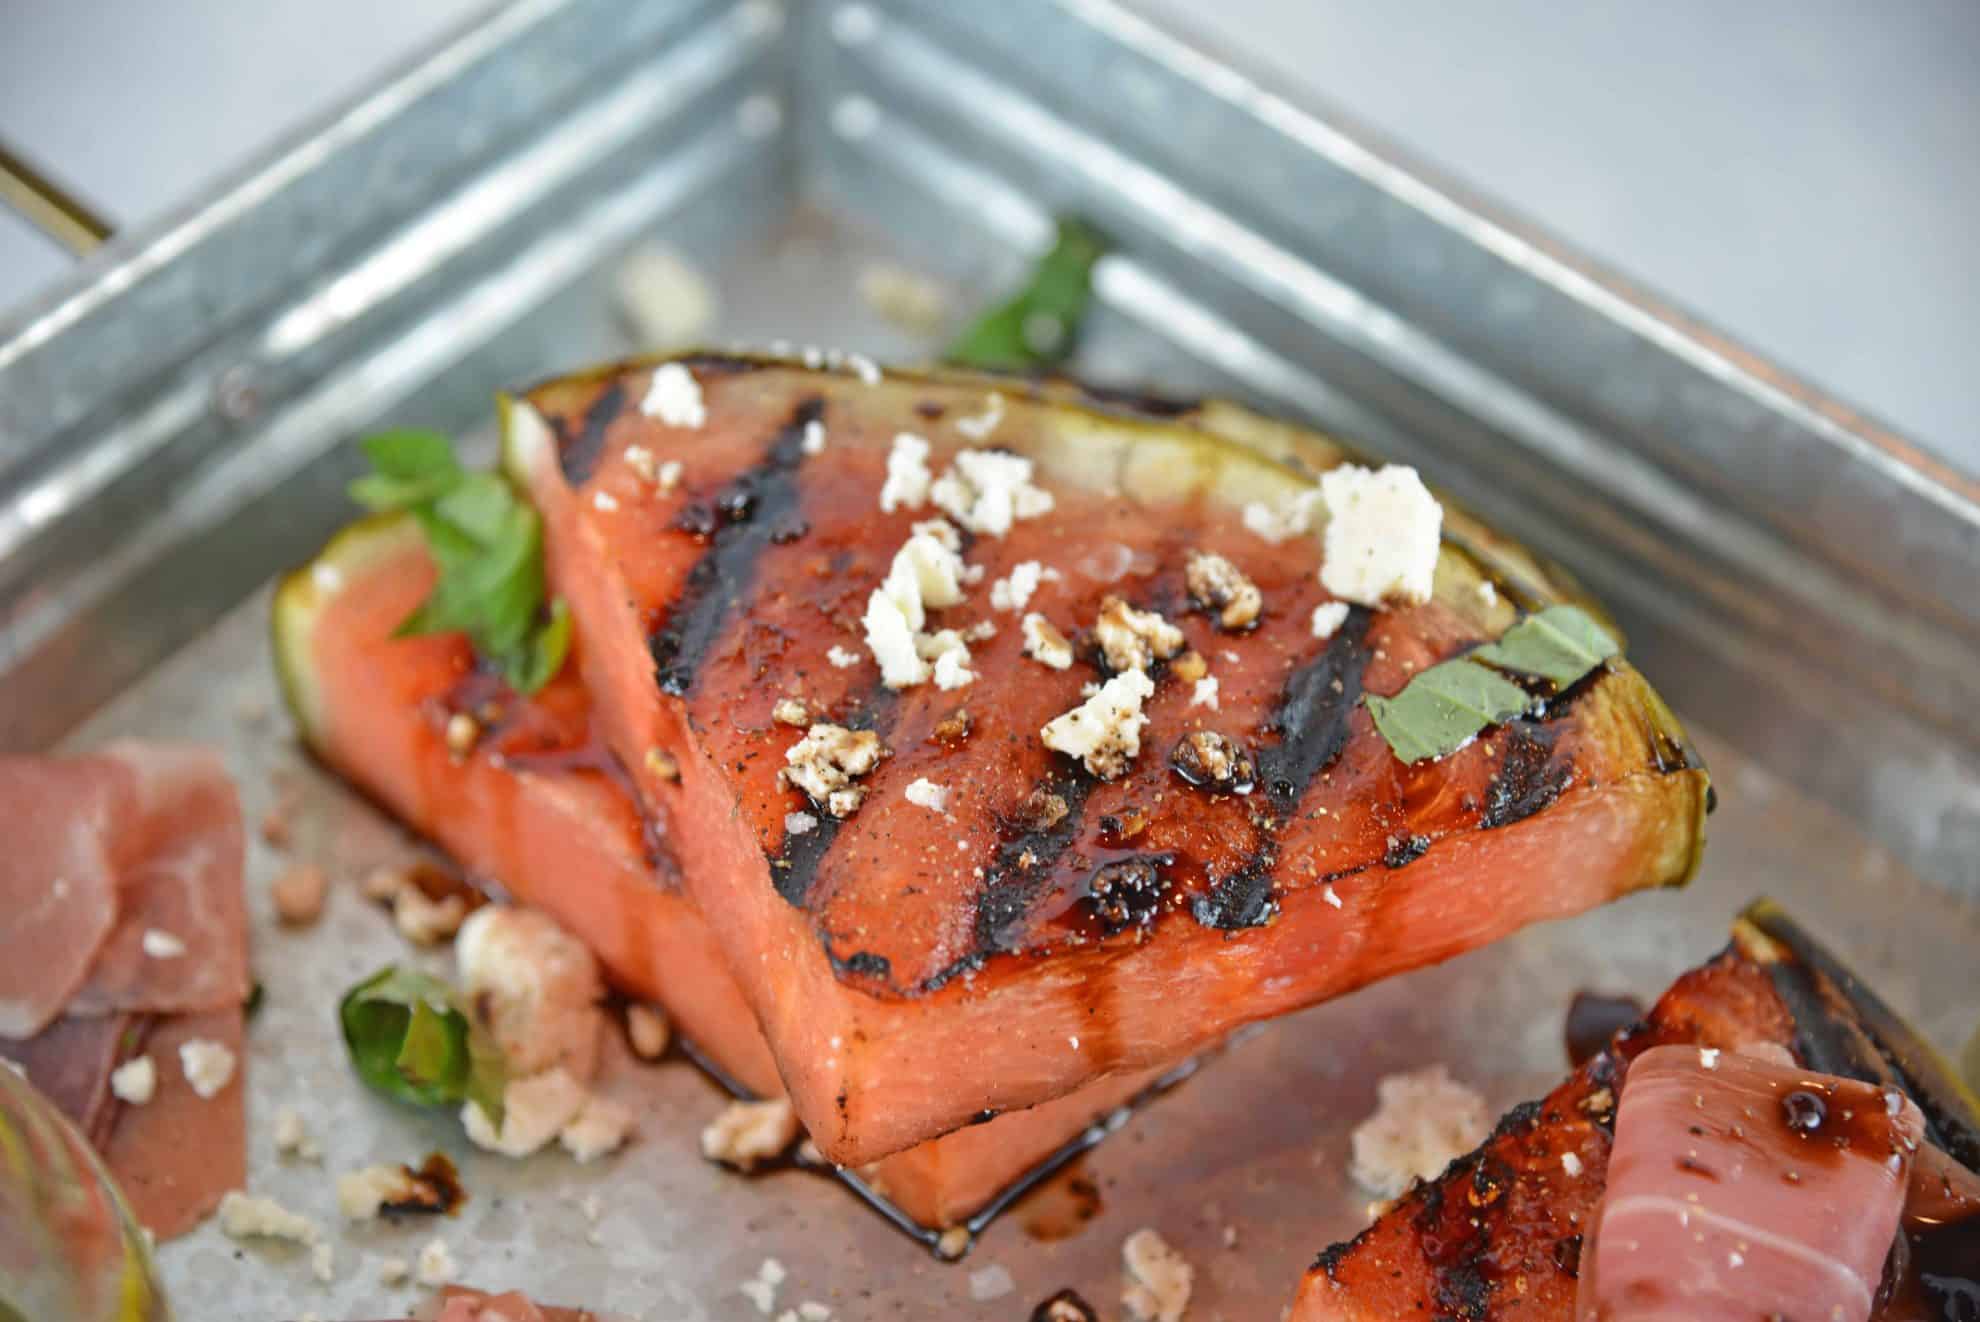 Grilled Watermelon Steaks with balsamic reduction and feta cheese are an easy BBQ side dish. Caramelized, juicy watermelon with savory cheese and sticky reduction is delicious! #grilledwatermelon #watermelonrecipes www.savoryexperiments.com 